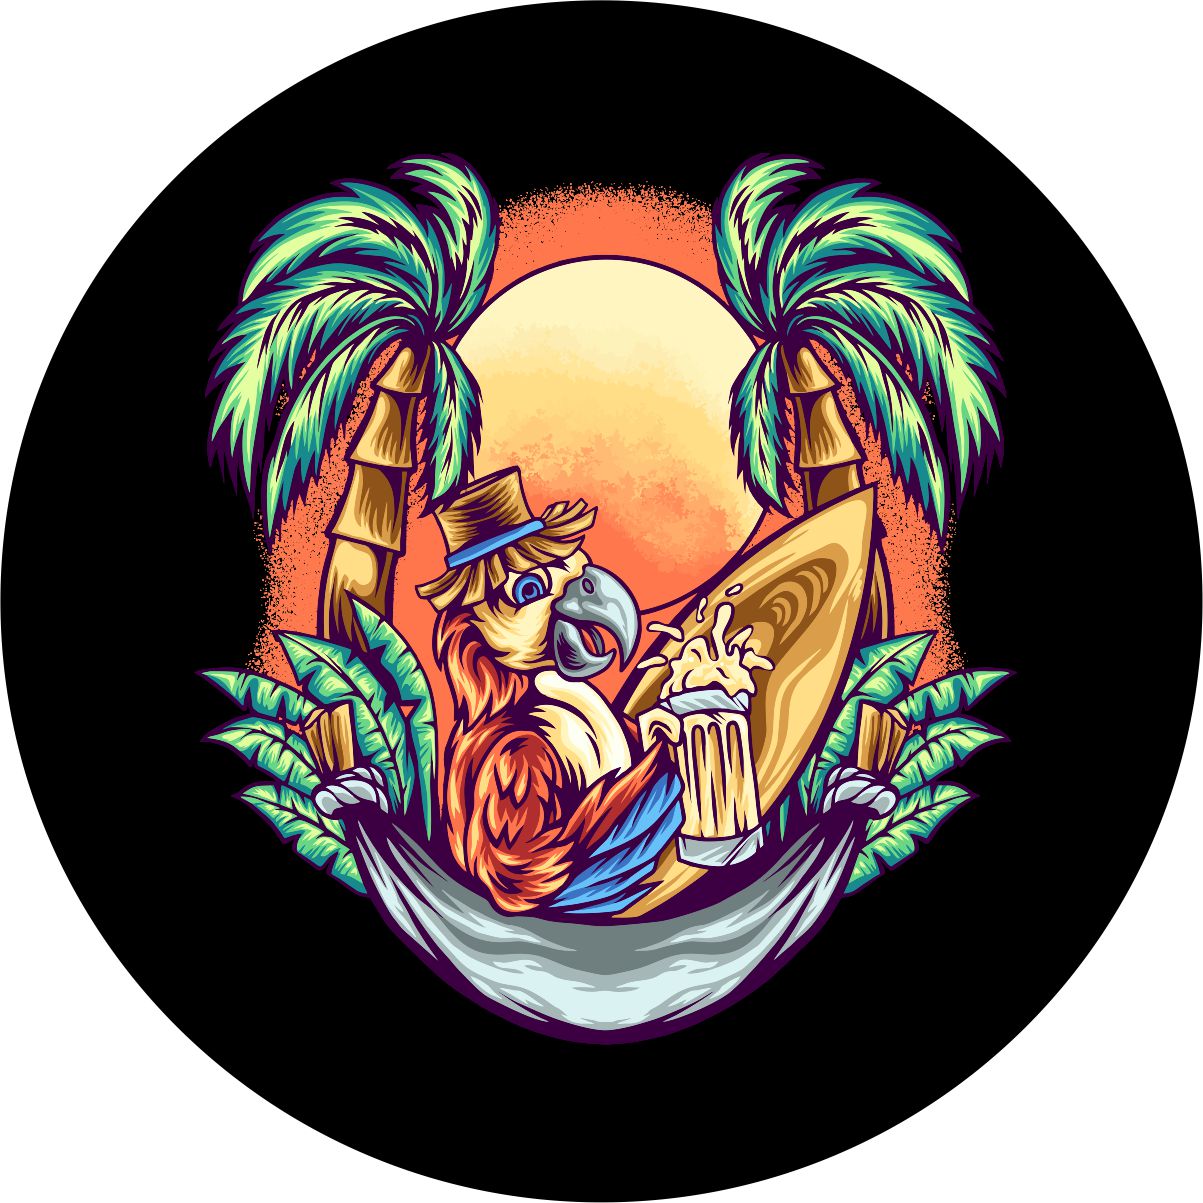 Spare tire cover of a parrot in a hammock drinking a beer, sitting next to his surfboard in between two palm trees at sunset at the beach.